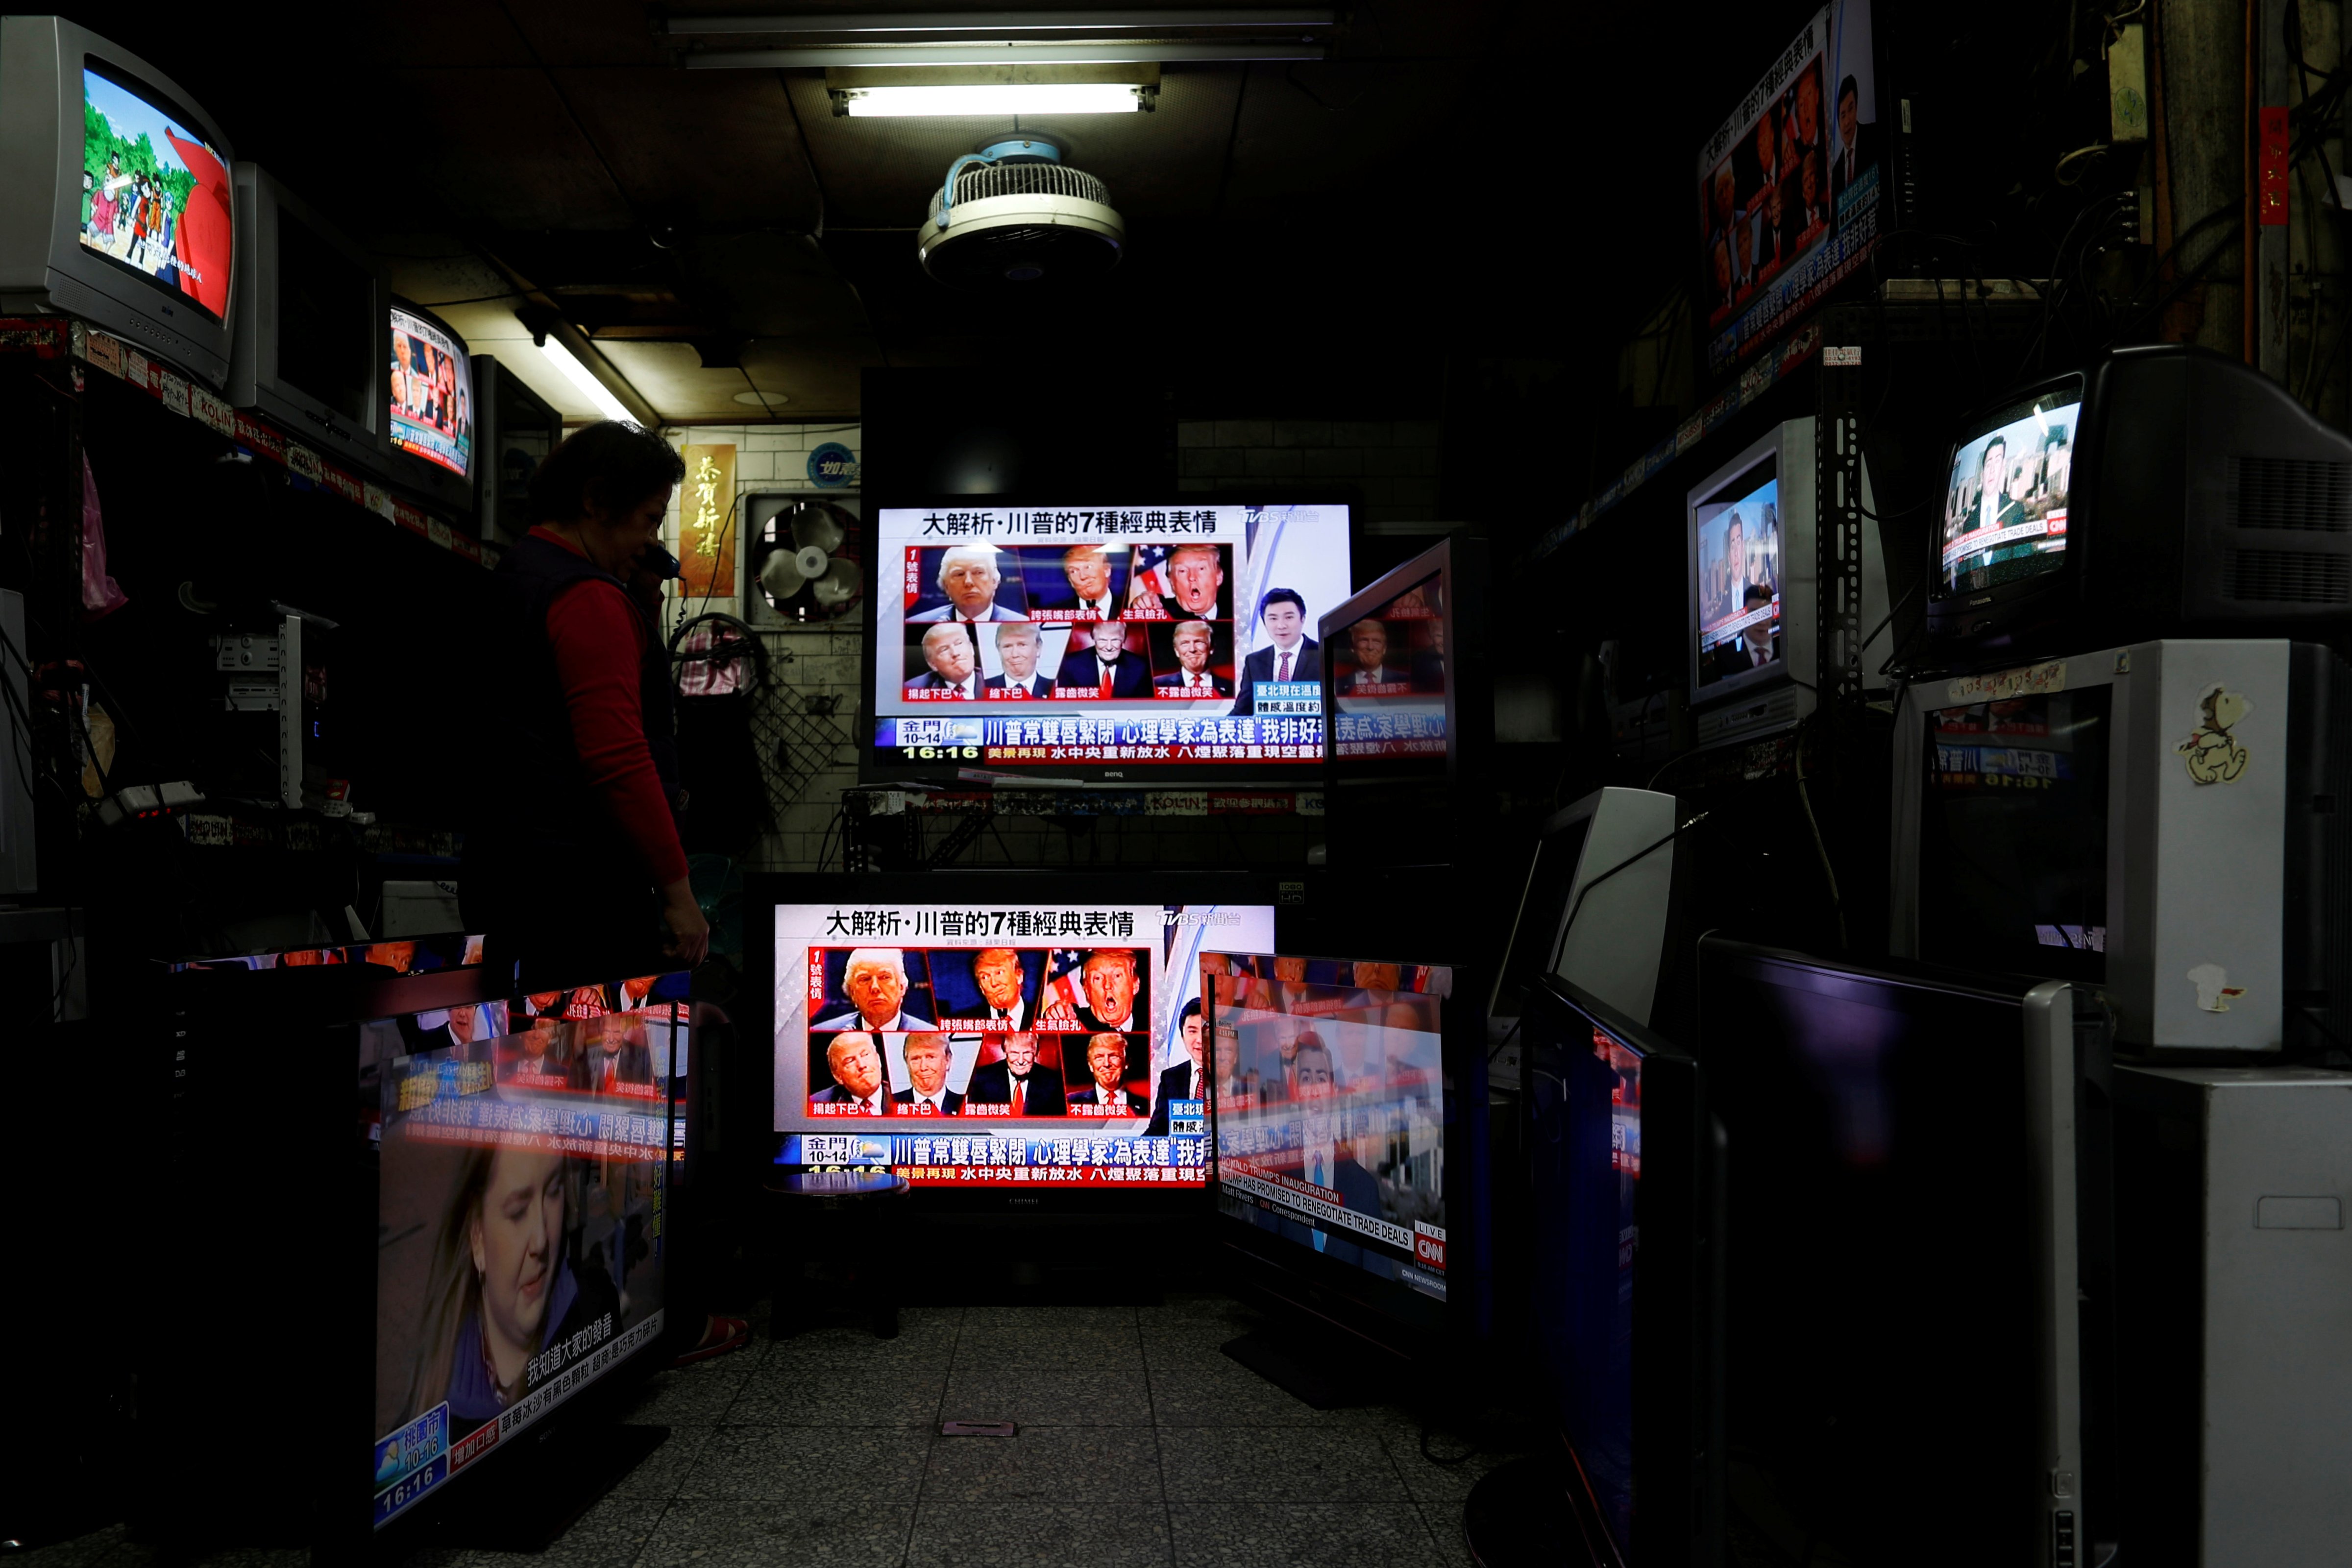 Images of U.S. President Donald Trump are seen on TV screens at a secondhand shop in Taipei on Jan. 21, 2017 (Tyrone Siu—Reuters)